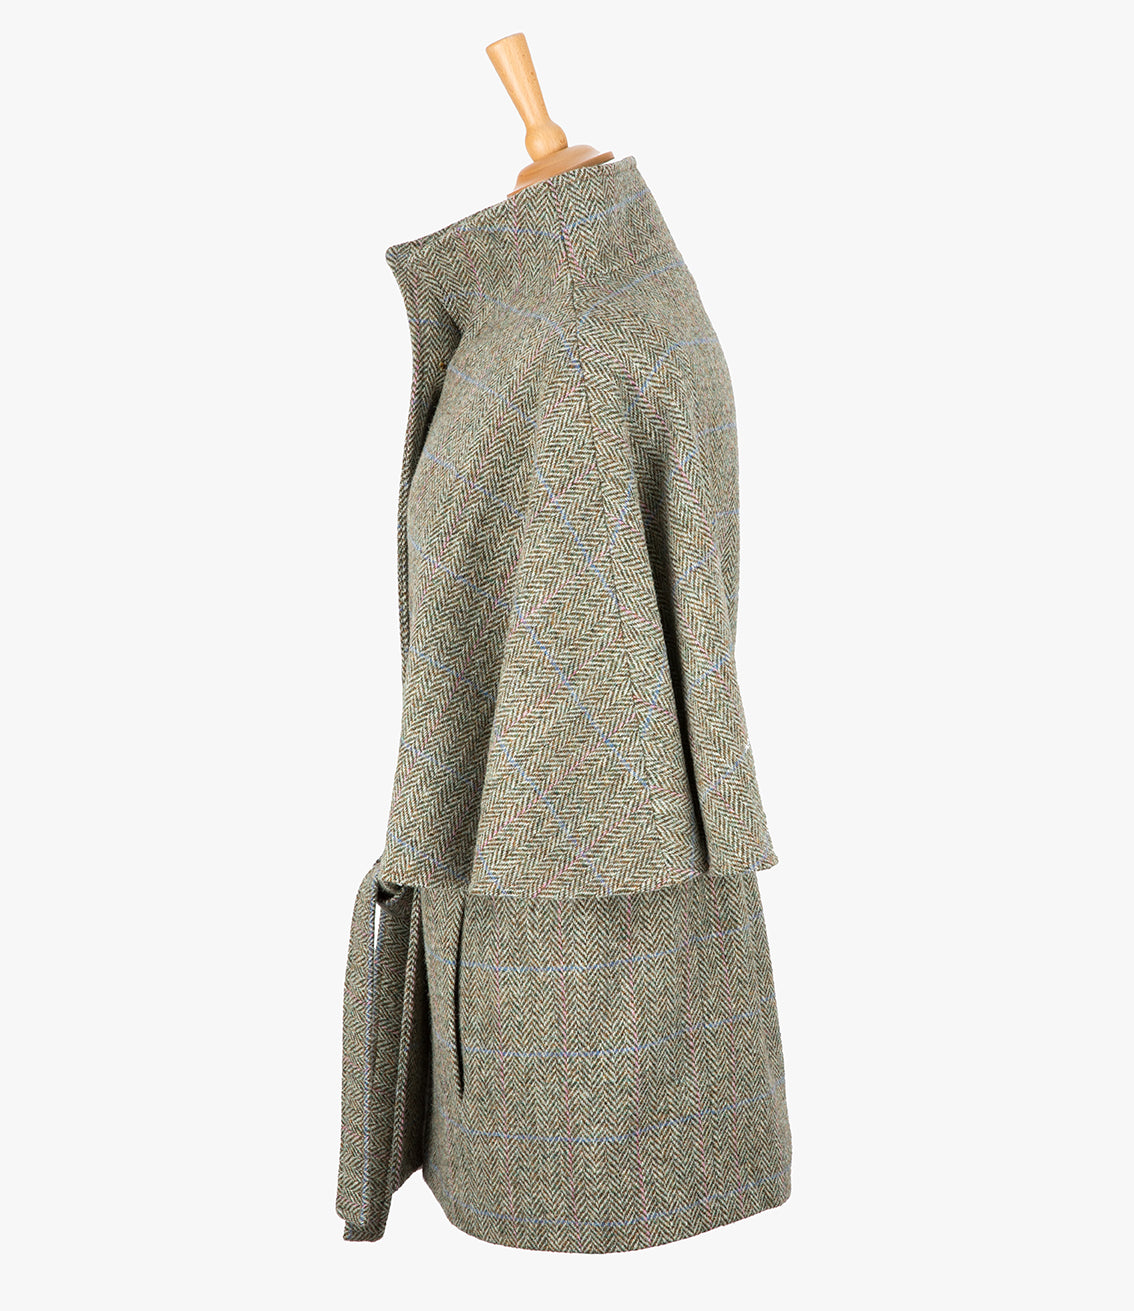 This is the side view of the belted cape in pastel check, the colour is cream and brown herringbone with a pink and blue overcheck. You can see the collar stood up and the sleeves of the cape which come mid-way down the arm. It has two pockets and ties at the waist for a neat silhouette.